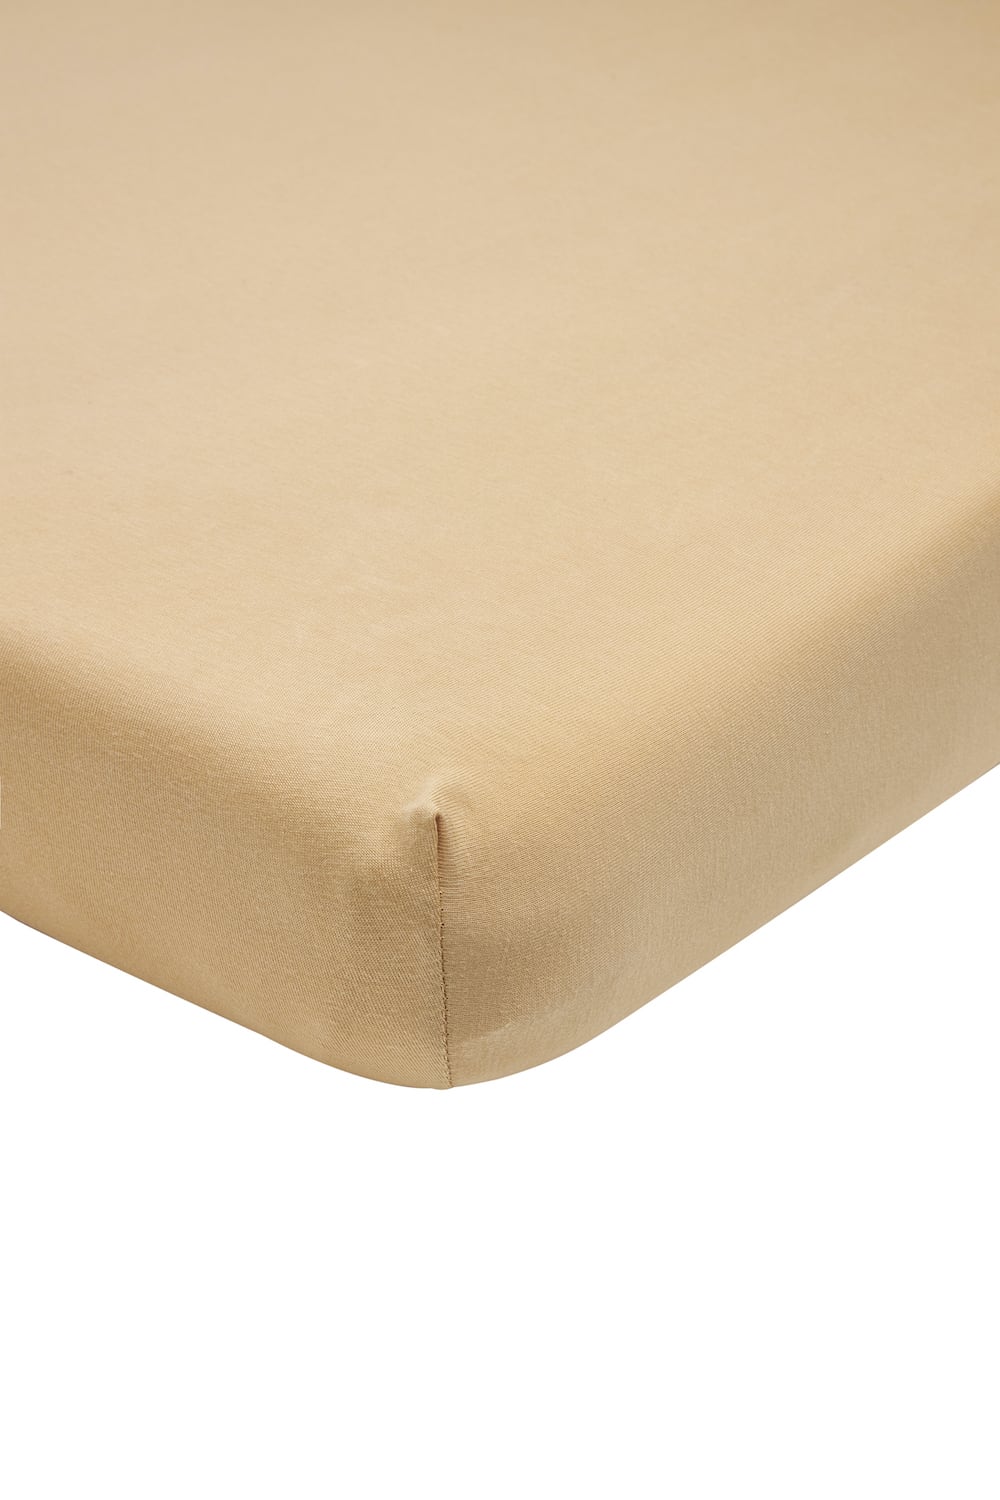 Hoeslaken 2-persoons Basic Jersey Warm Sand (160x200cm)